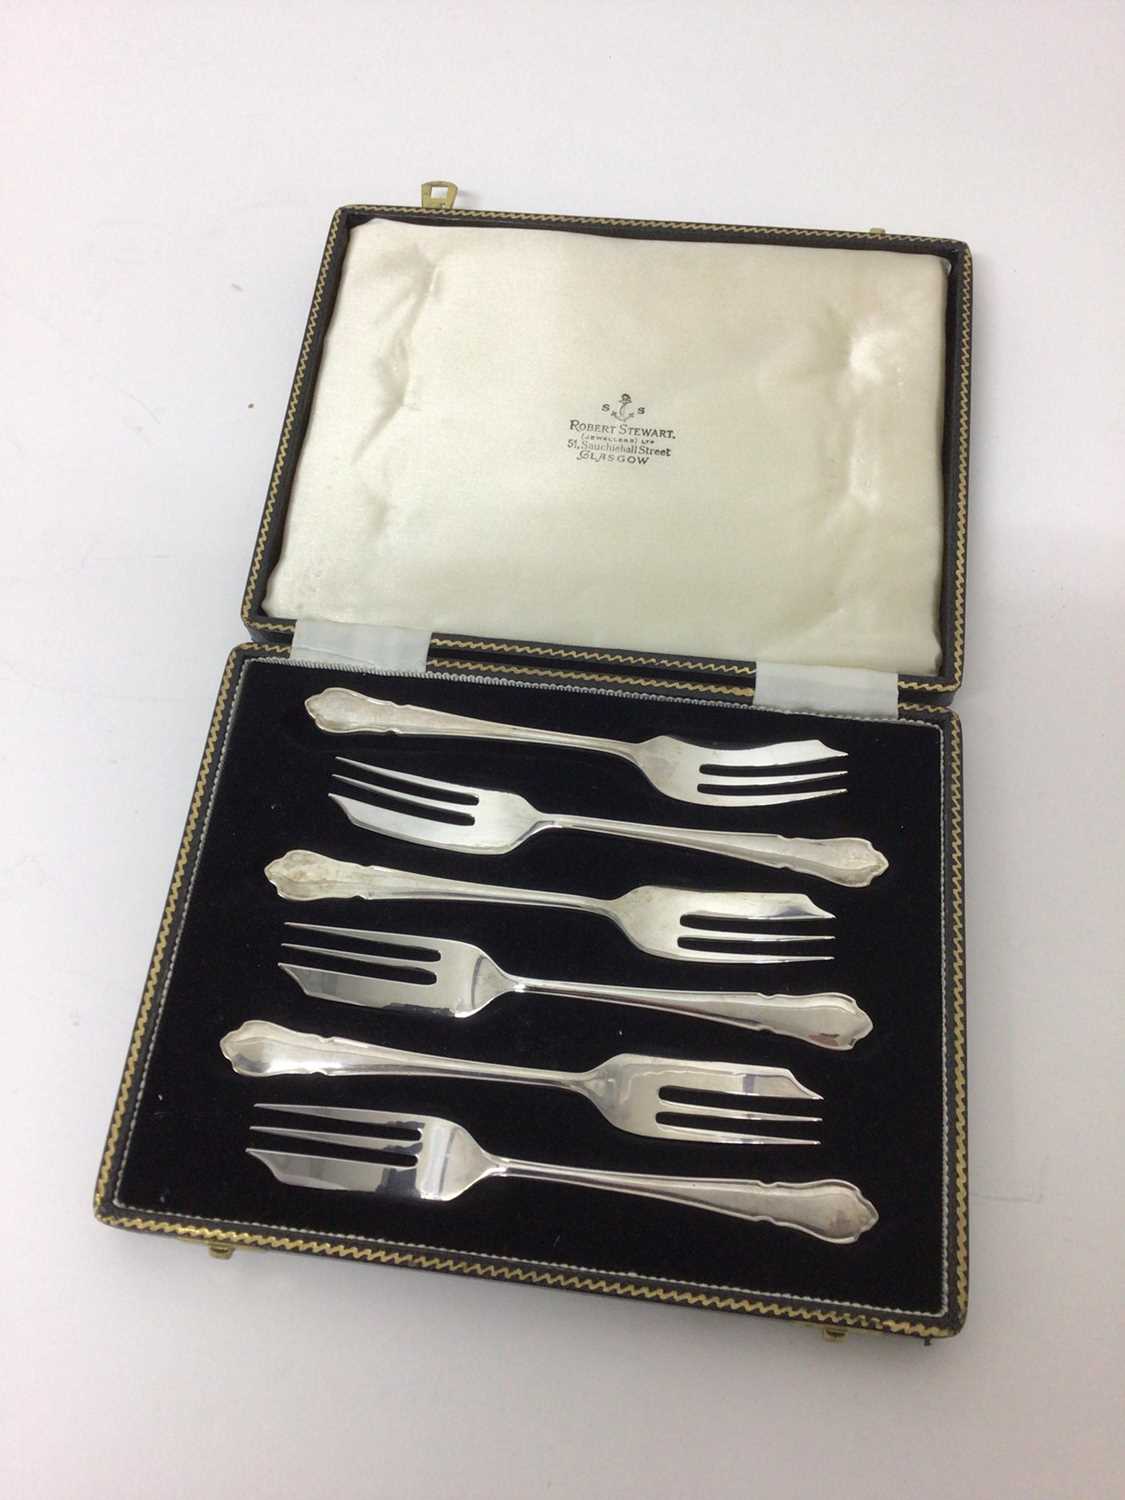 Lot 74 - Set of six silver Du Barry pattern cake forks in original fitted box